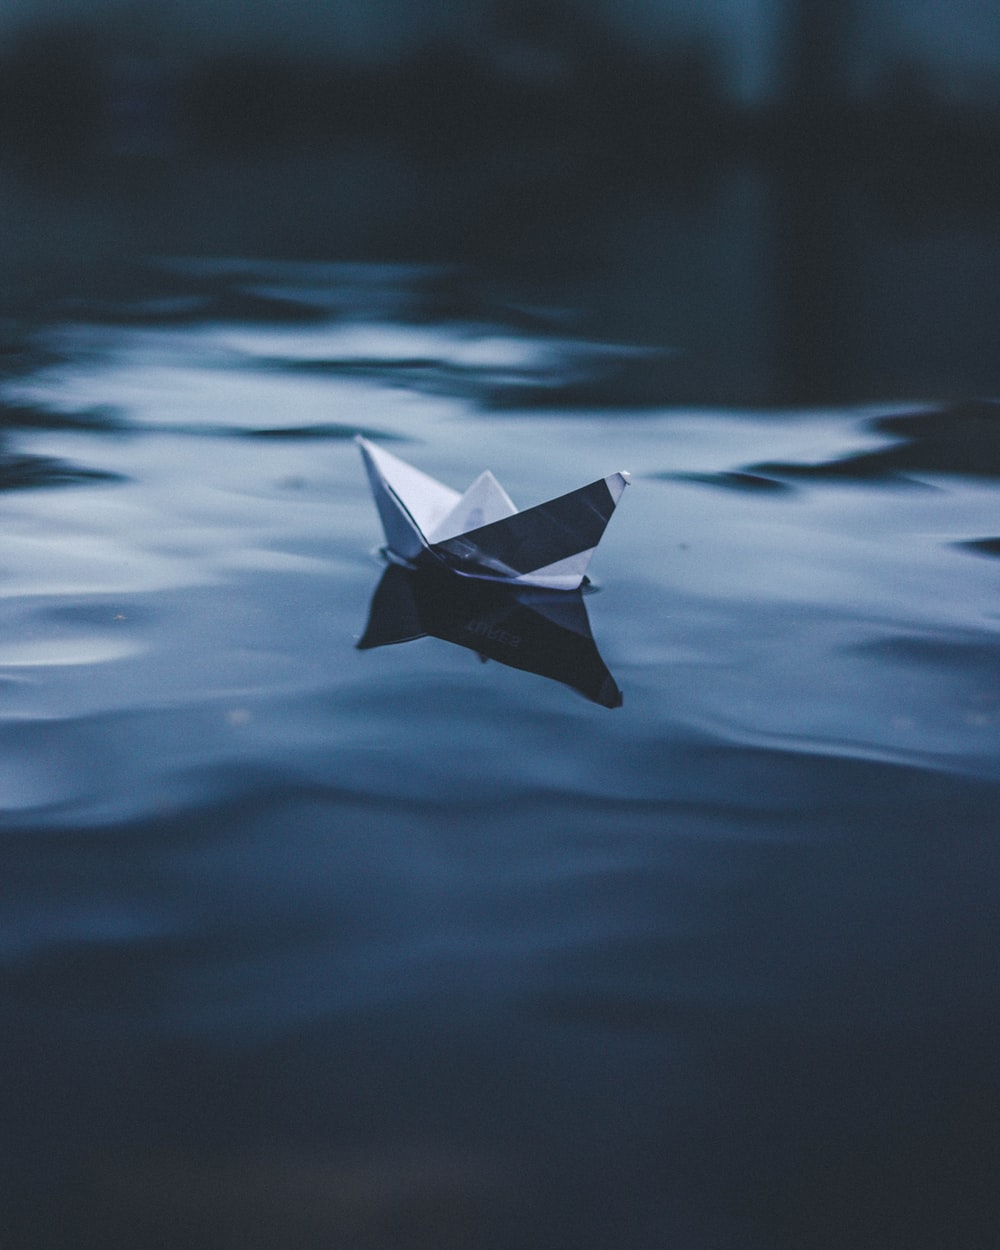 Paper Boat Picture Wallpapers